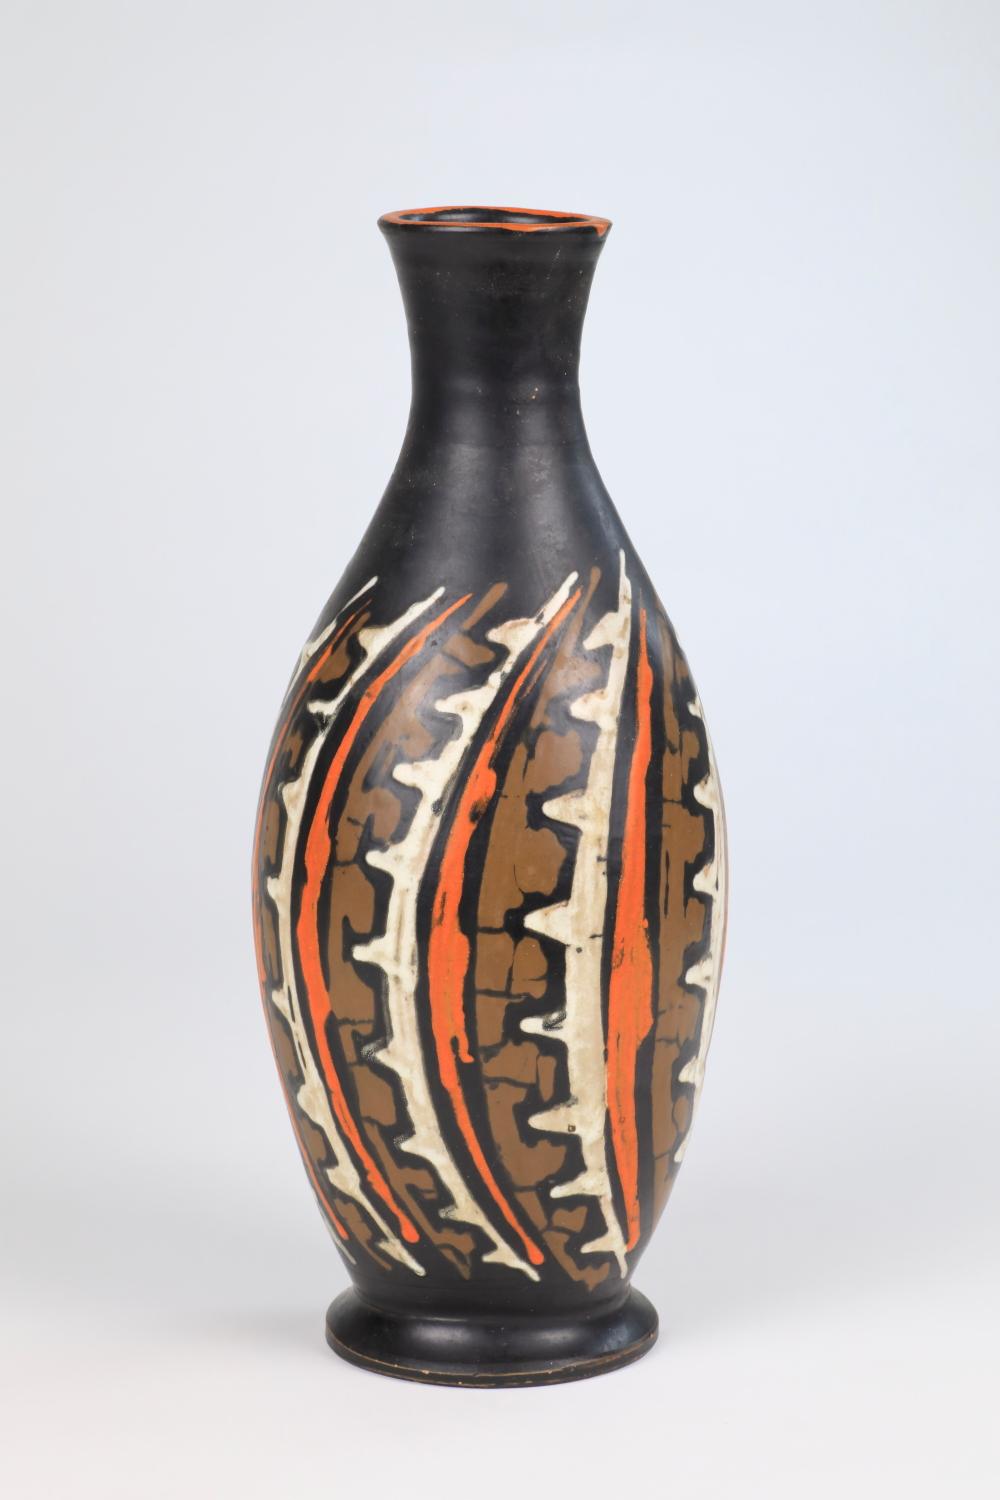 The ceramic work of Livia Gorka stands out as truly unique and special, bearing the hallmark of her masterful craftsmanship, deep connection to nature, and innovative approach to pottery.

At the heart of her distinctive style lies Gorka's reverence